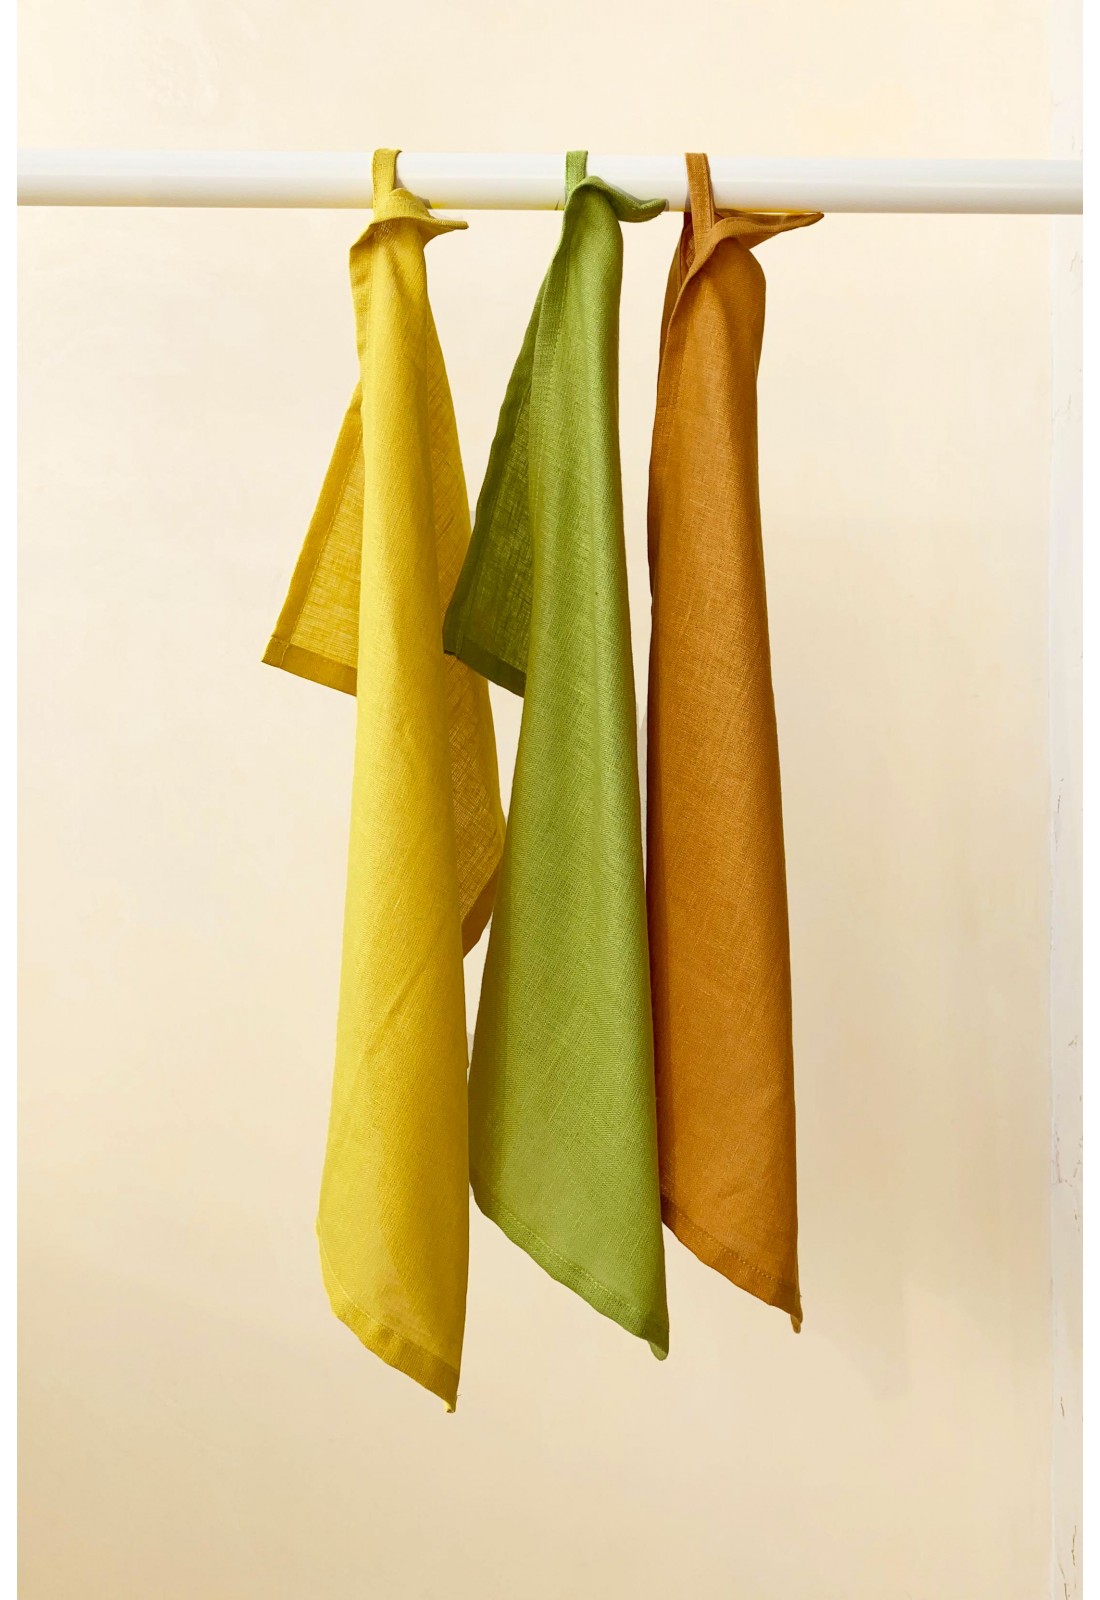 https://www.touchablelinen.com/image/cache/catalog/products/19/Linen-towel-All-colors-and-size-9-1100x1600.jpg